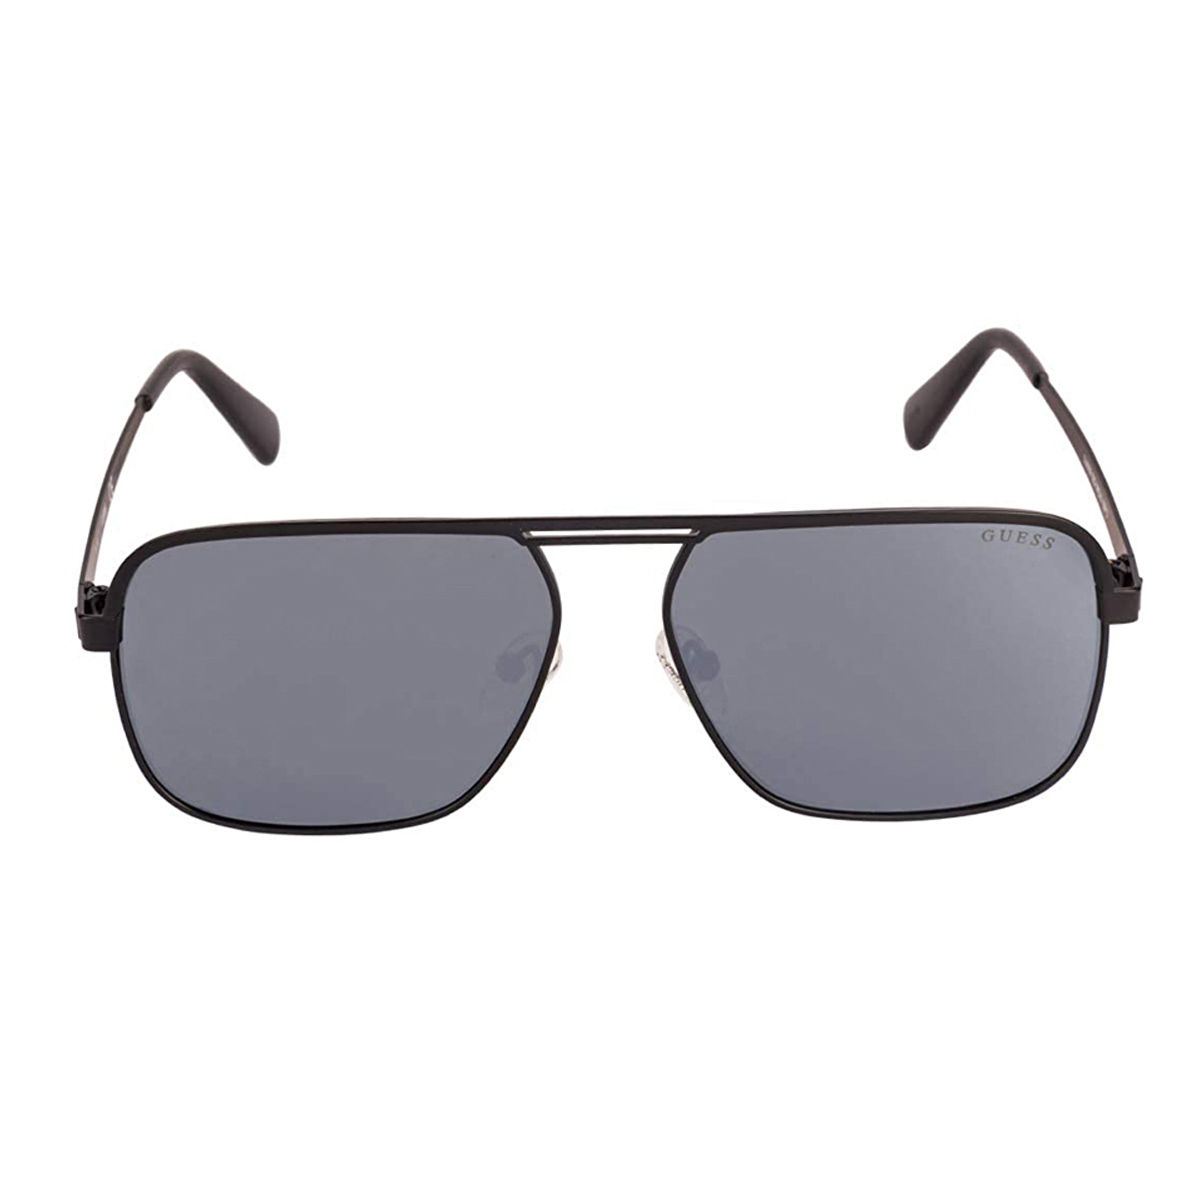 Guess Sunglasses Aviator With Green Lens For Men